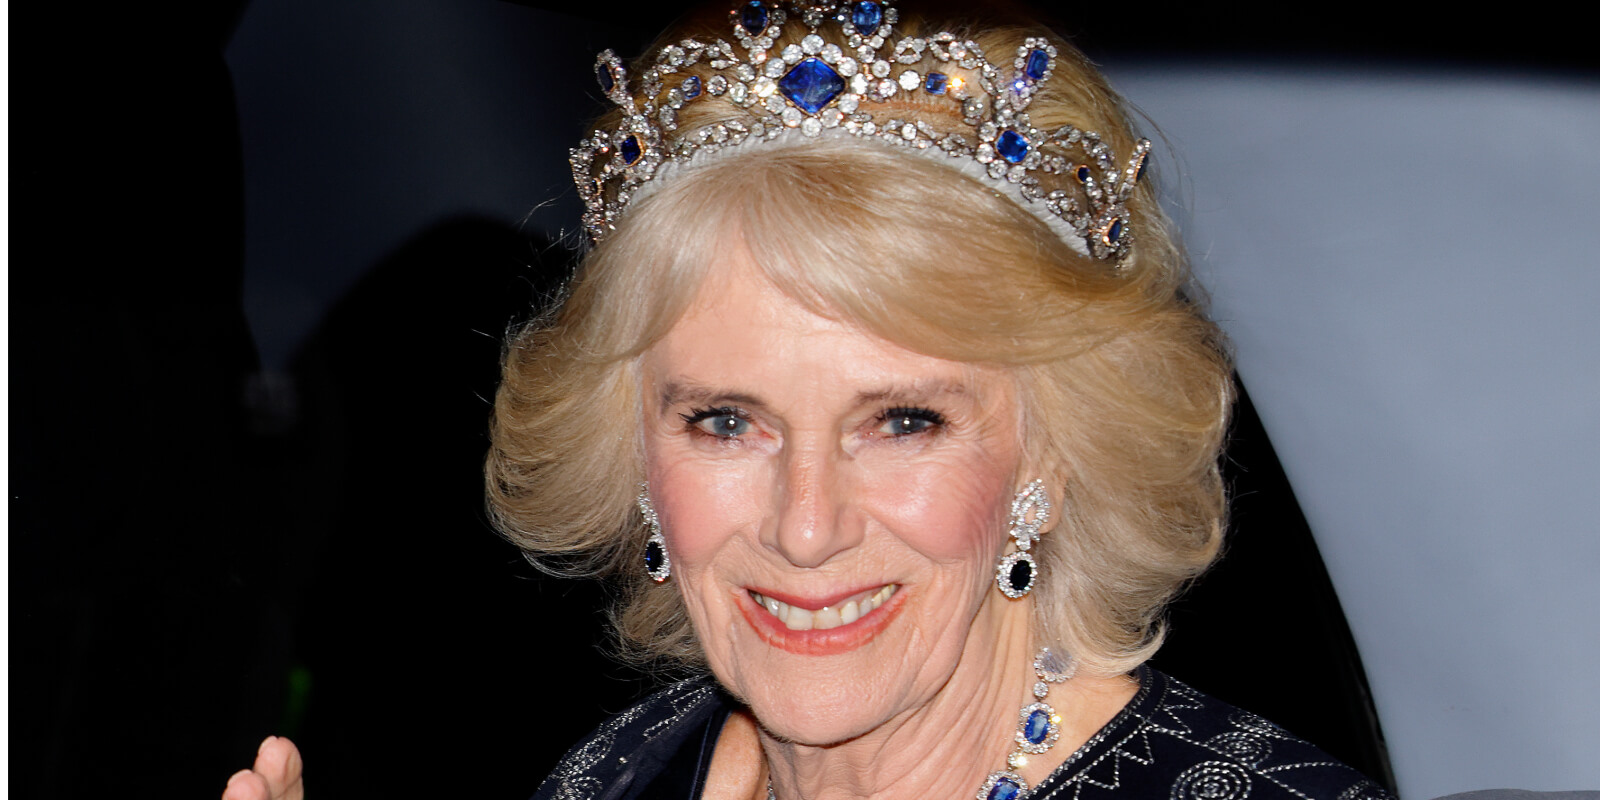 Camilla, Queen Consort, is only the 8th woman to hold that role in the history of the British royal family.